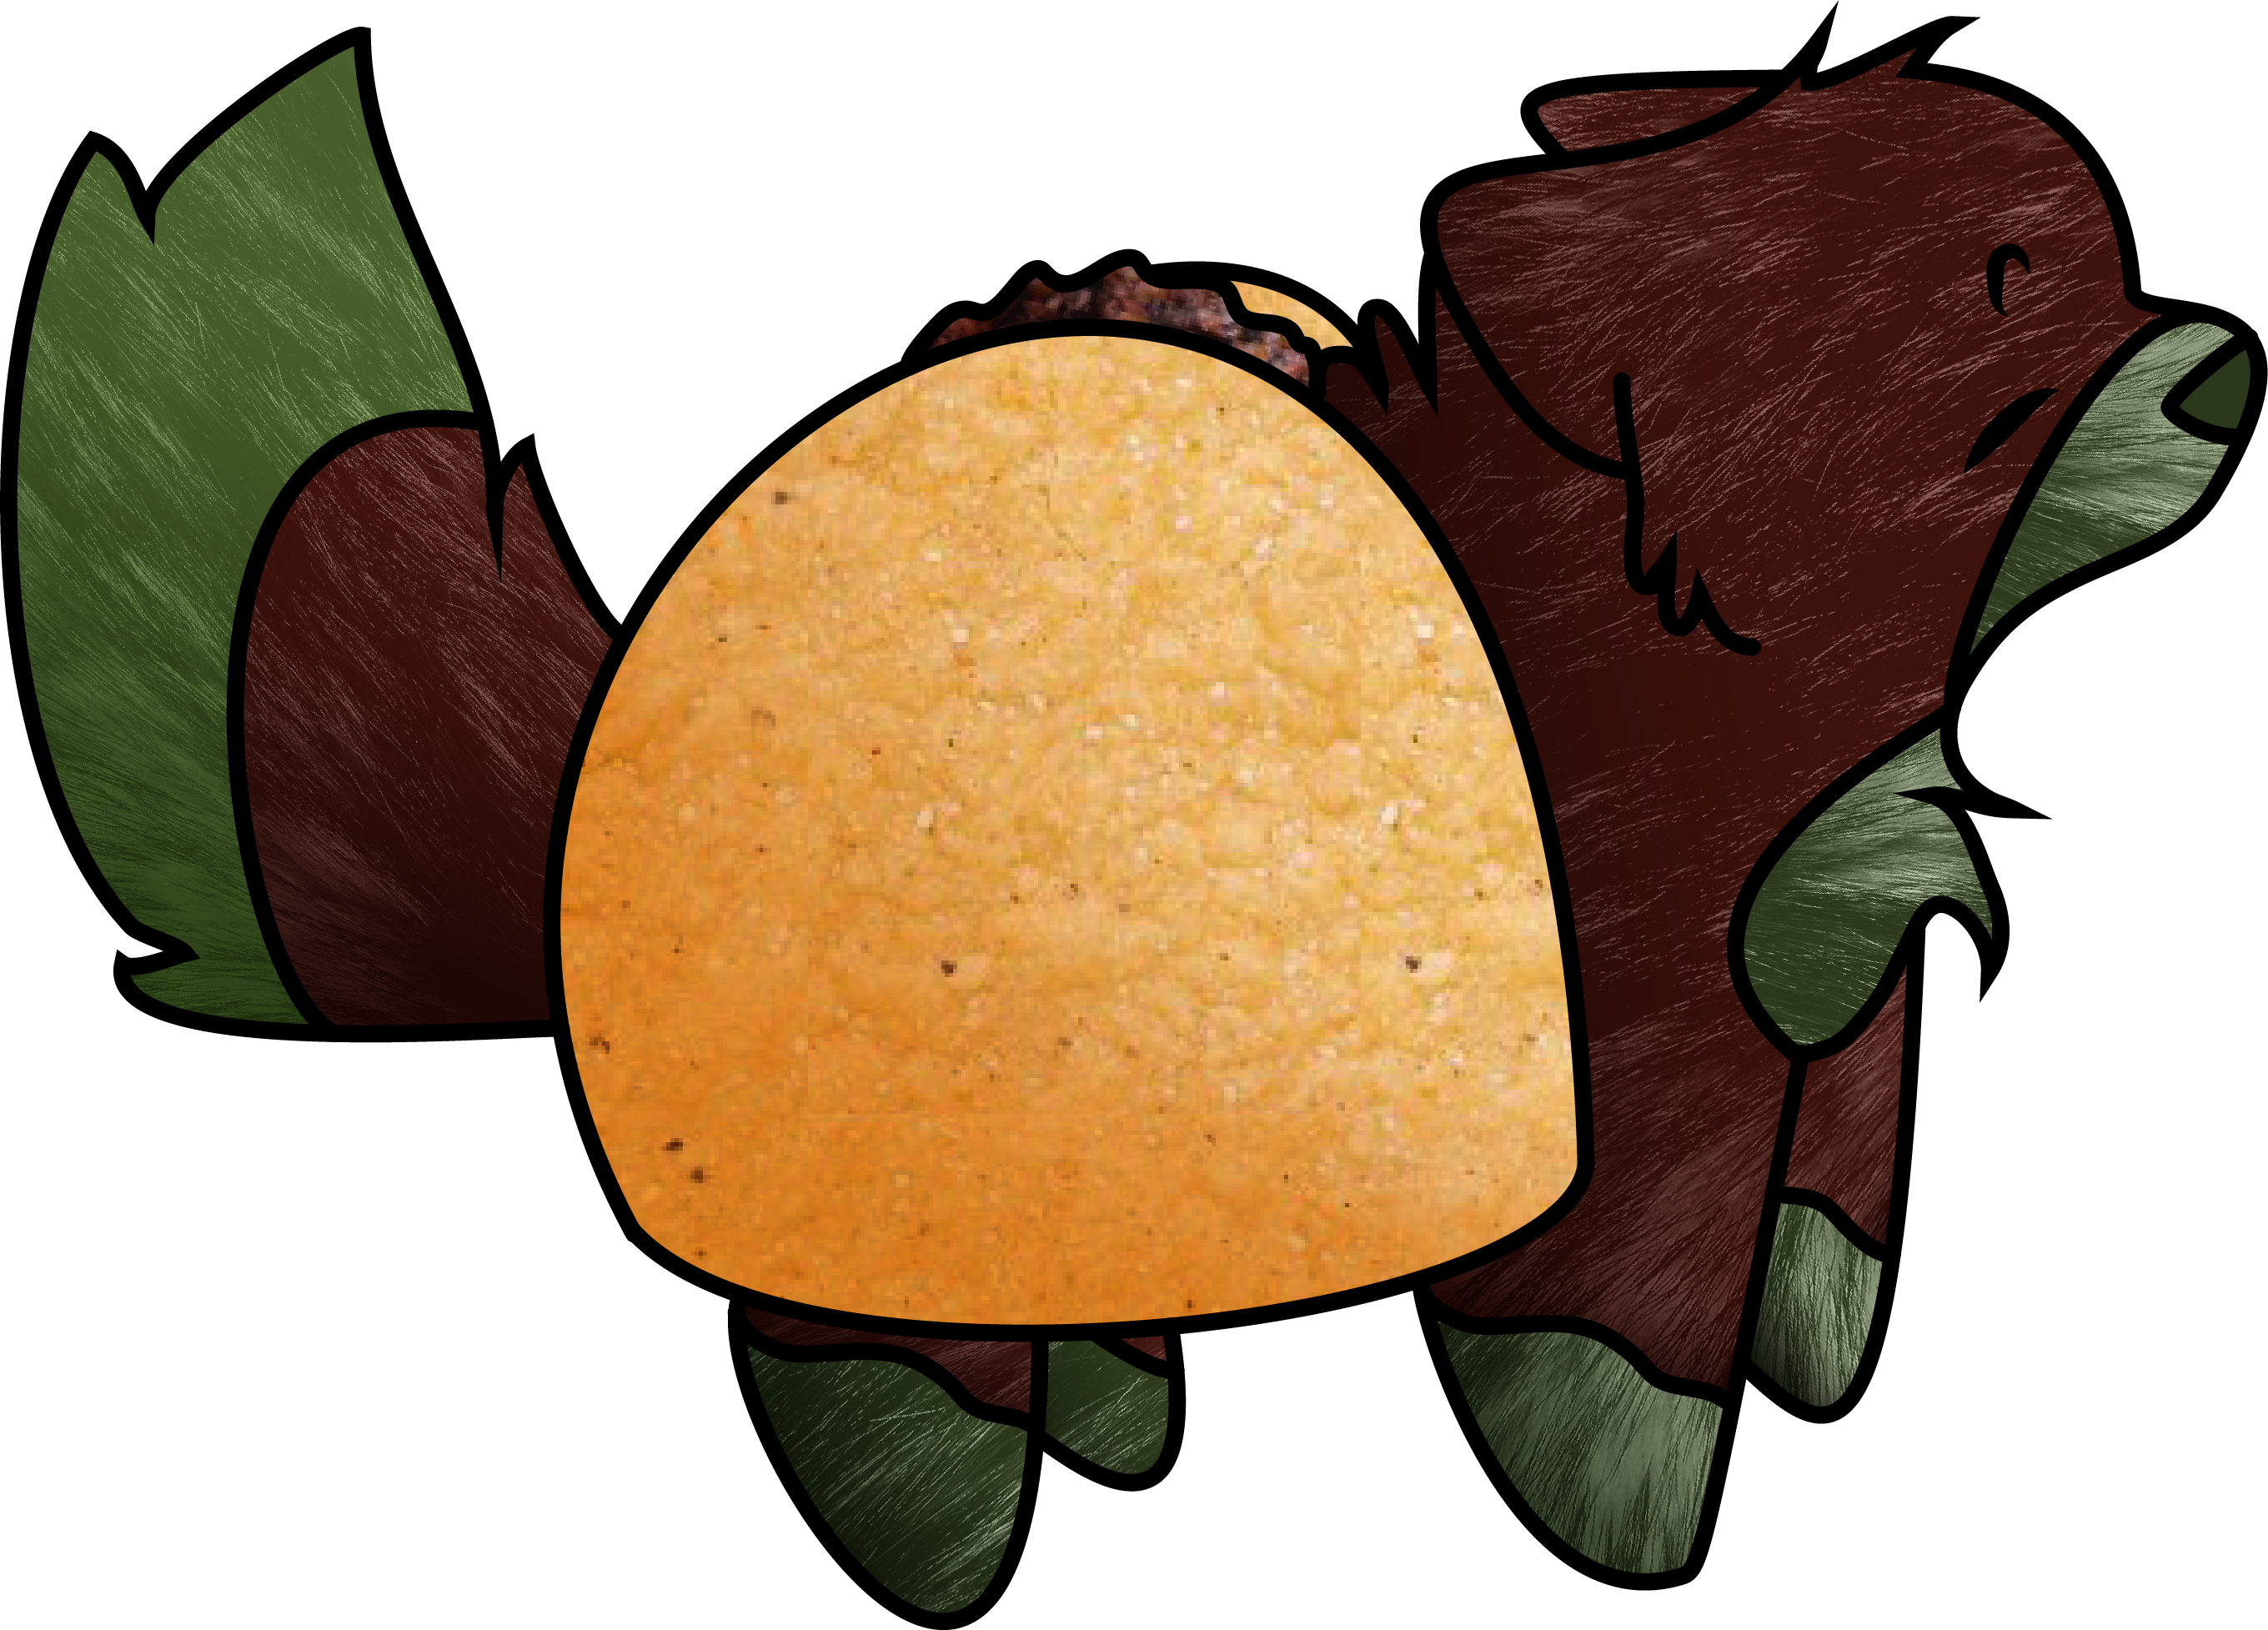 tacowolfie_by_thattacoguy-d58cggc.png